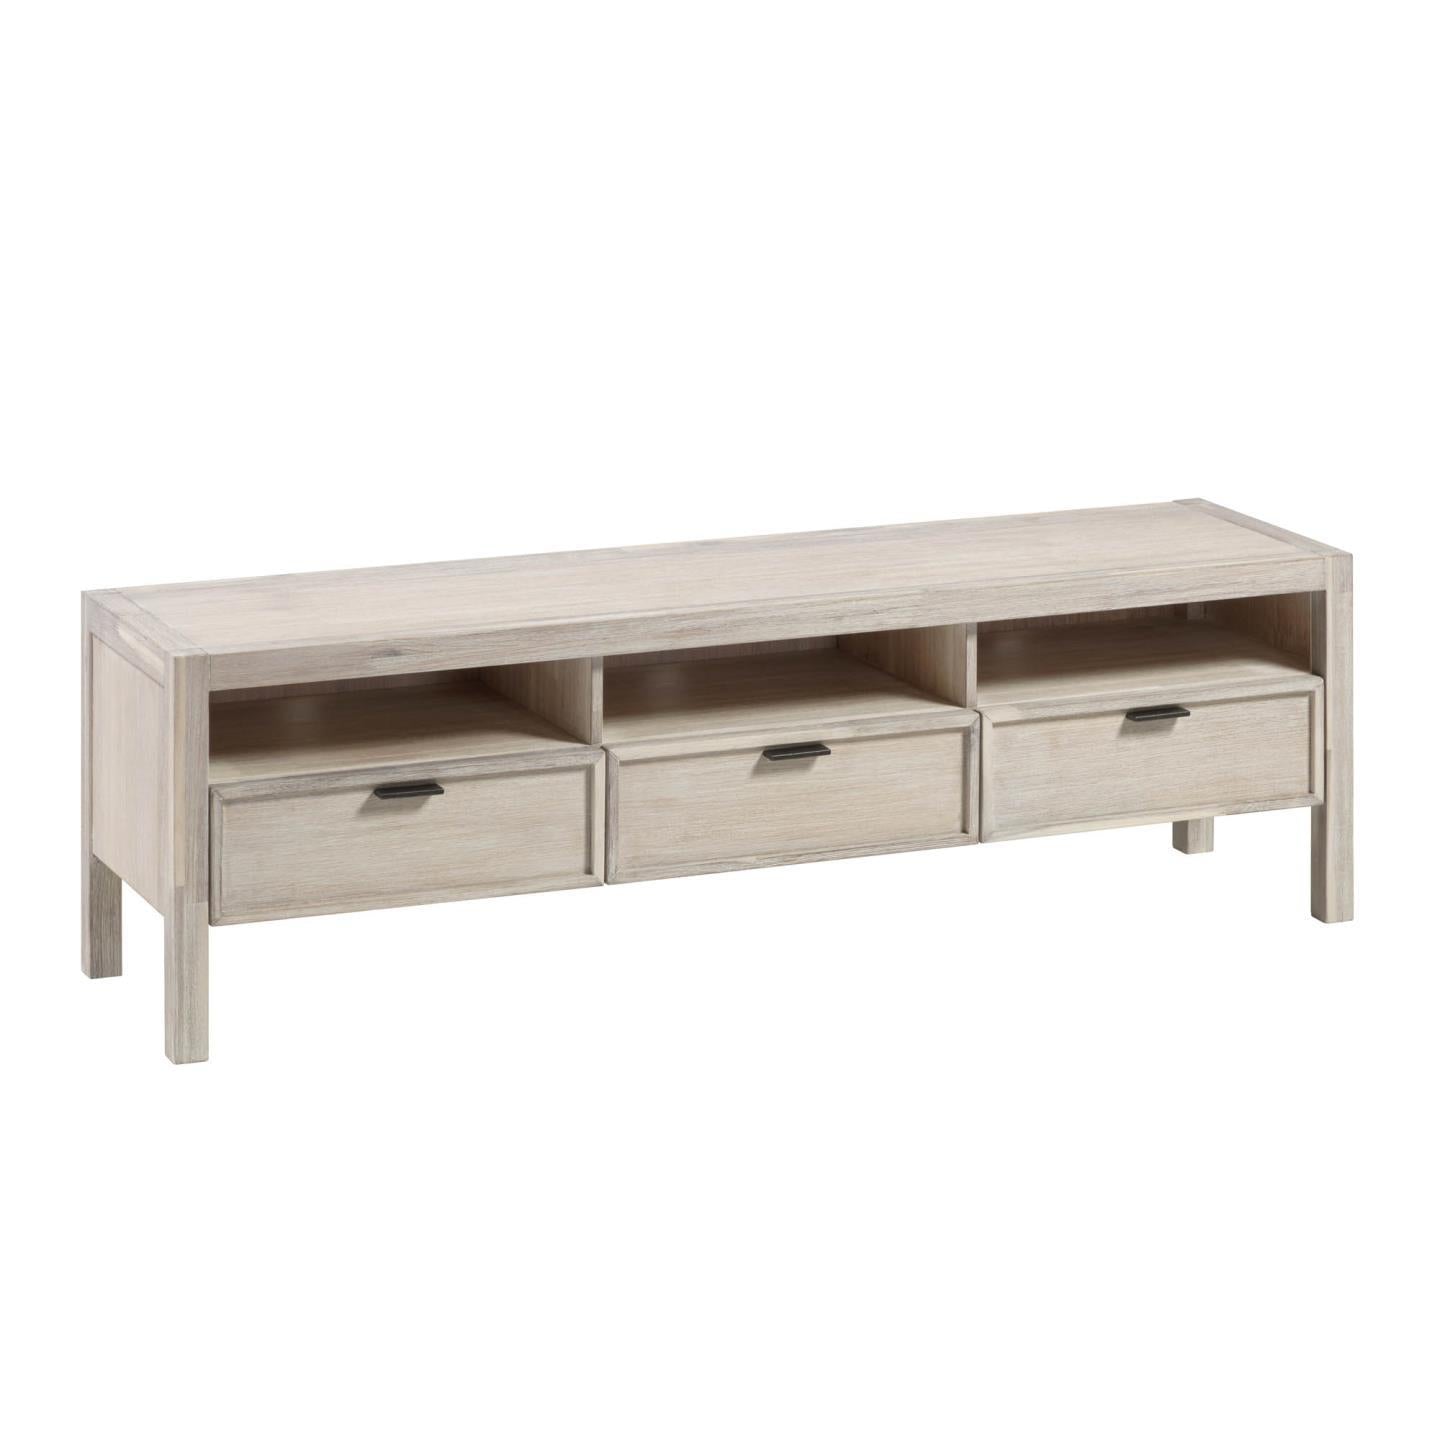 Alen solid acacia wood TV stand with 3 drawers, 165 x 50 cm